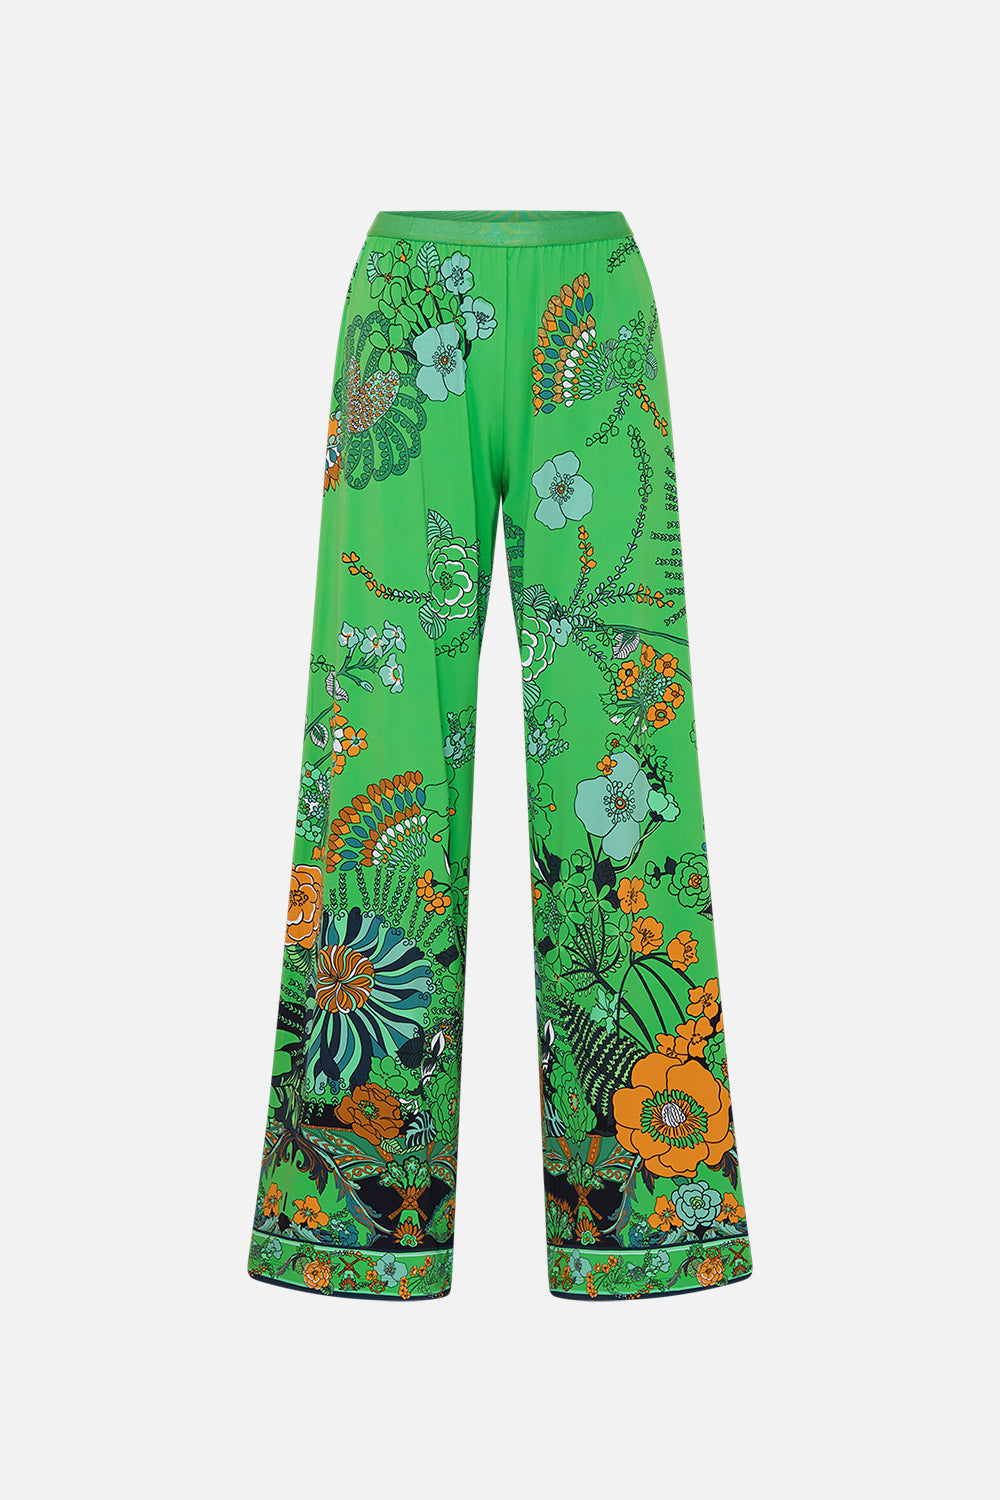 CAMILLA green coverup pants in Good Vibes Generation